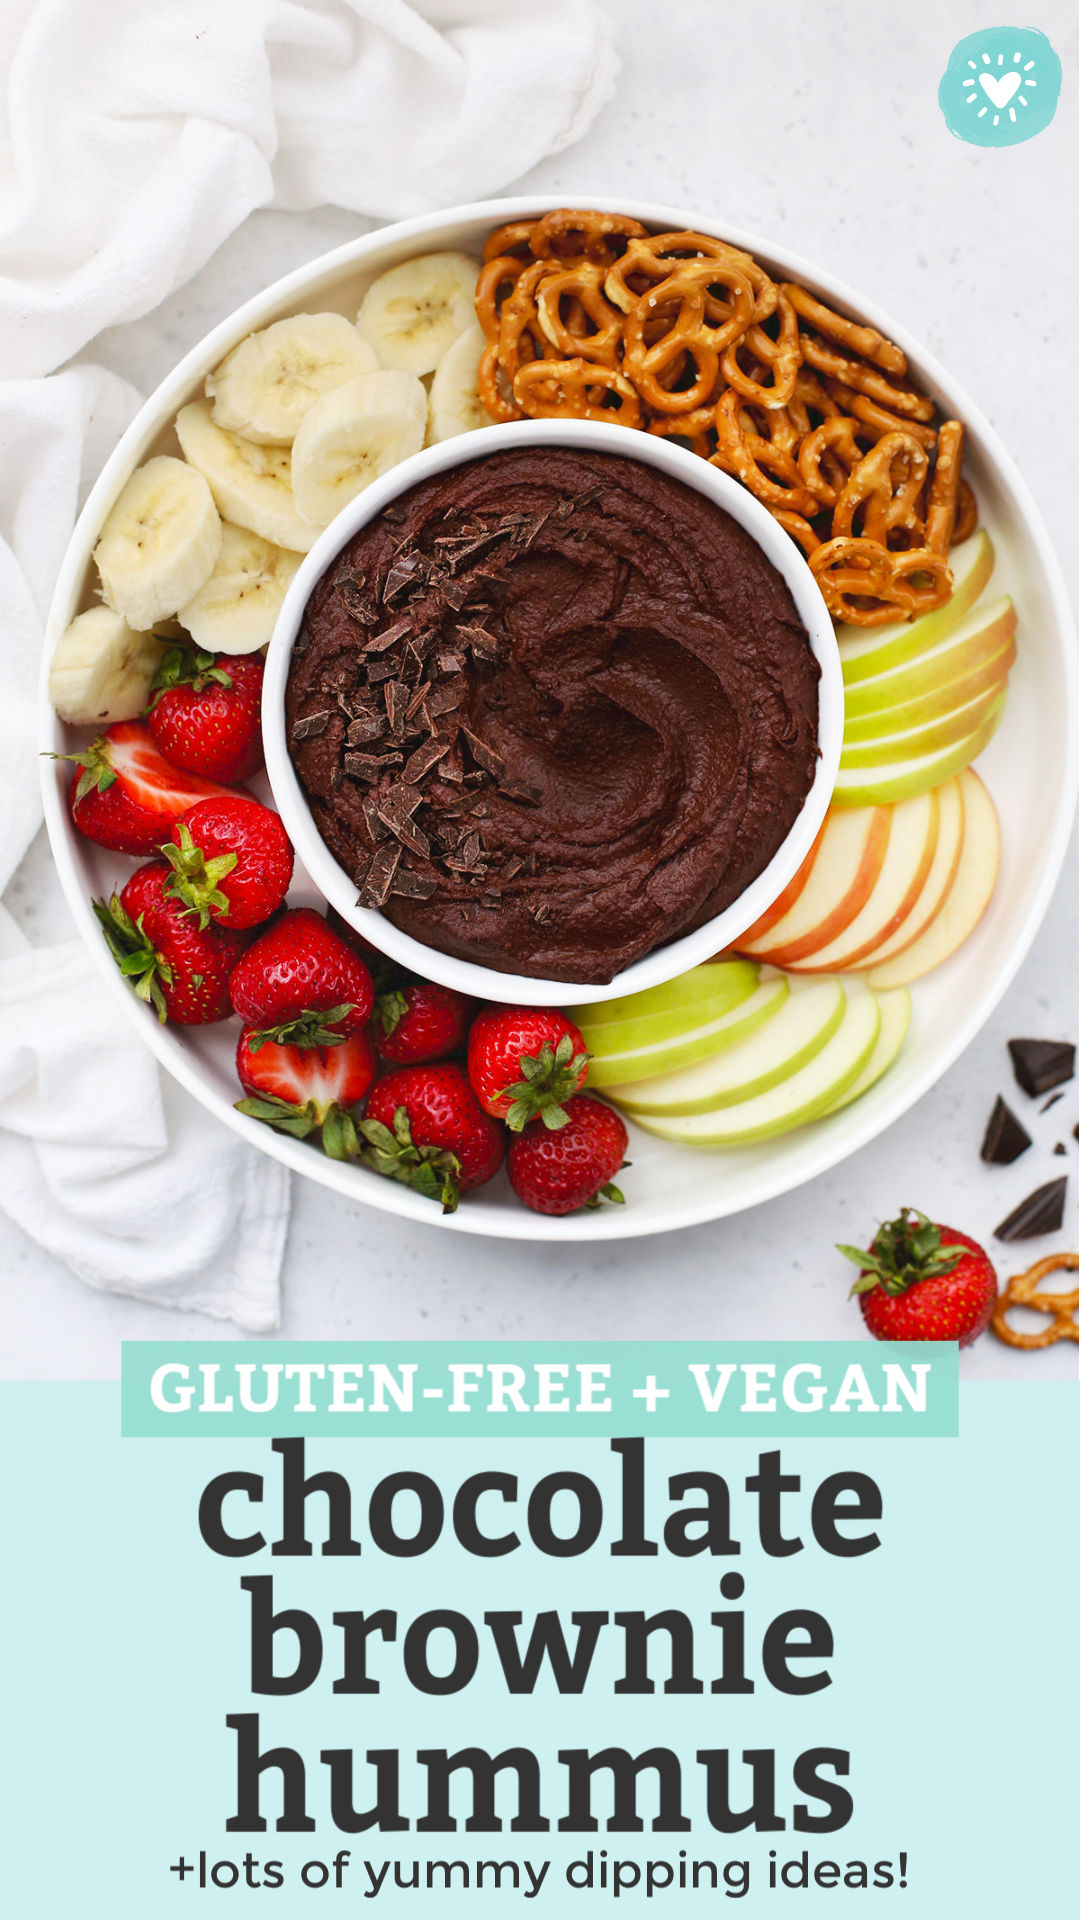 Overhead view of a bowl of chocolate brownie hummus on a fruit plate with text overlay that reads "Gluten-Free + Vegan Chocolate Brownie Hummus +lots of yummy dipping ideas"